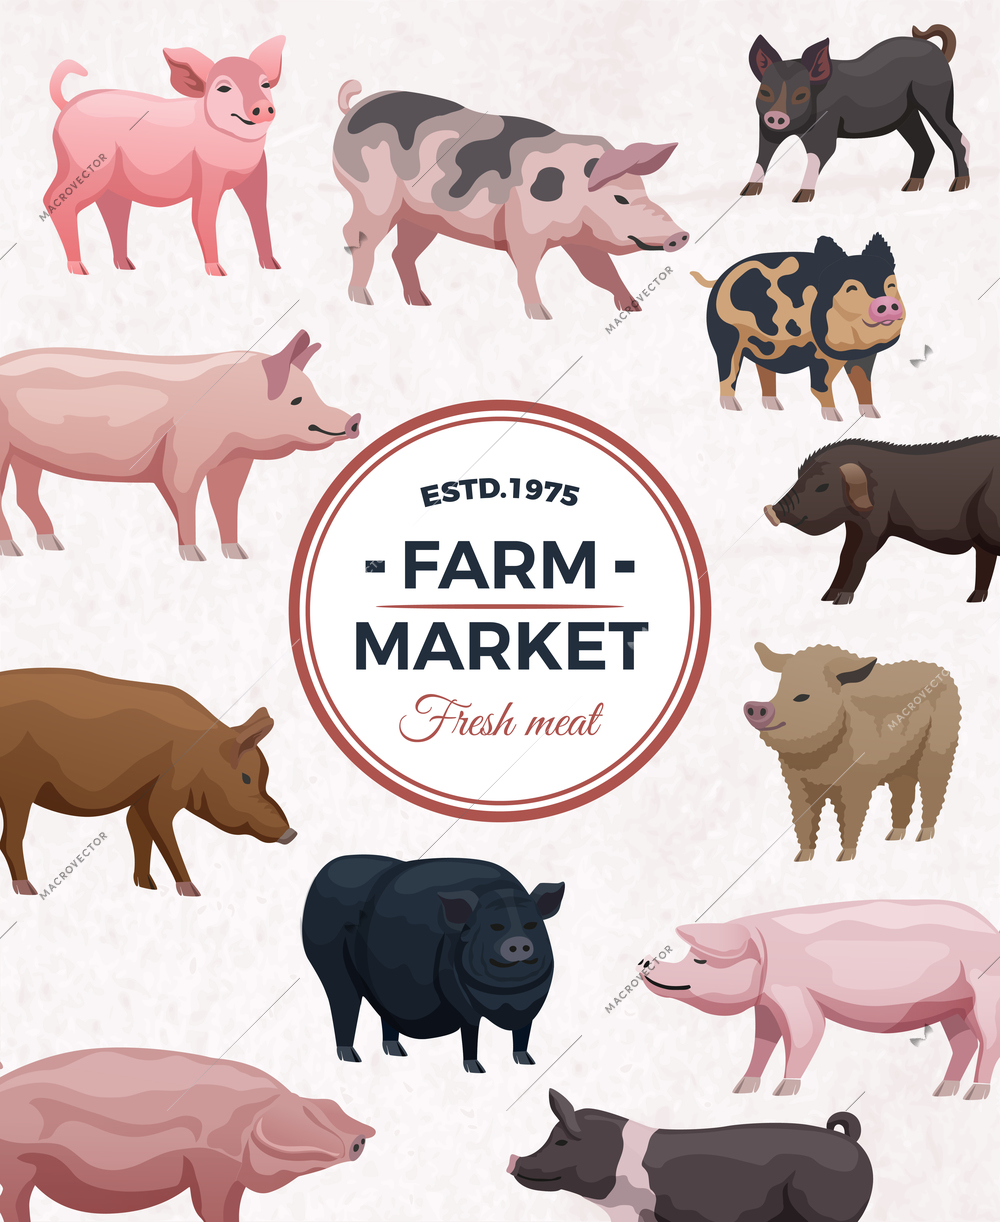 Farm market advertising poster with round frame and various pigs on light background vector illustration